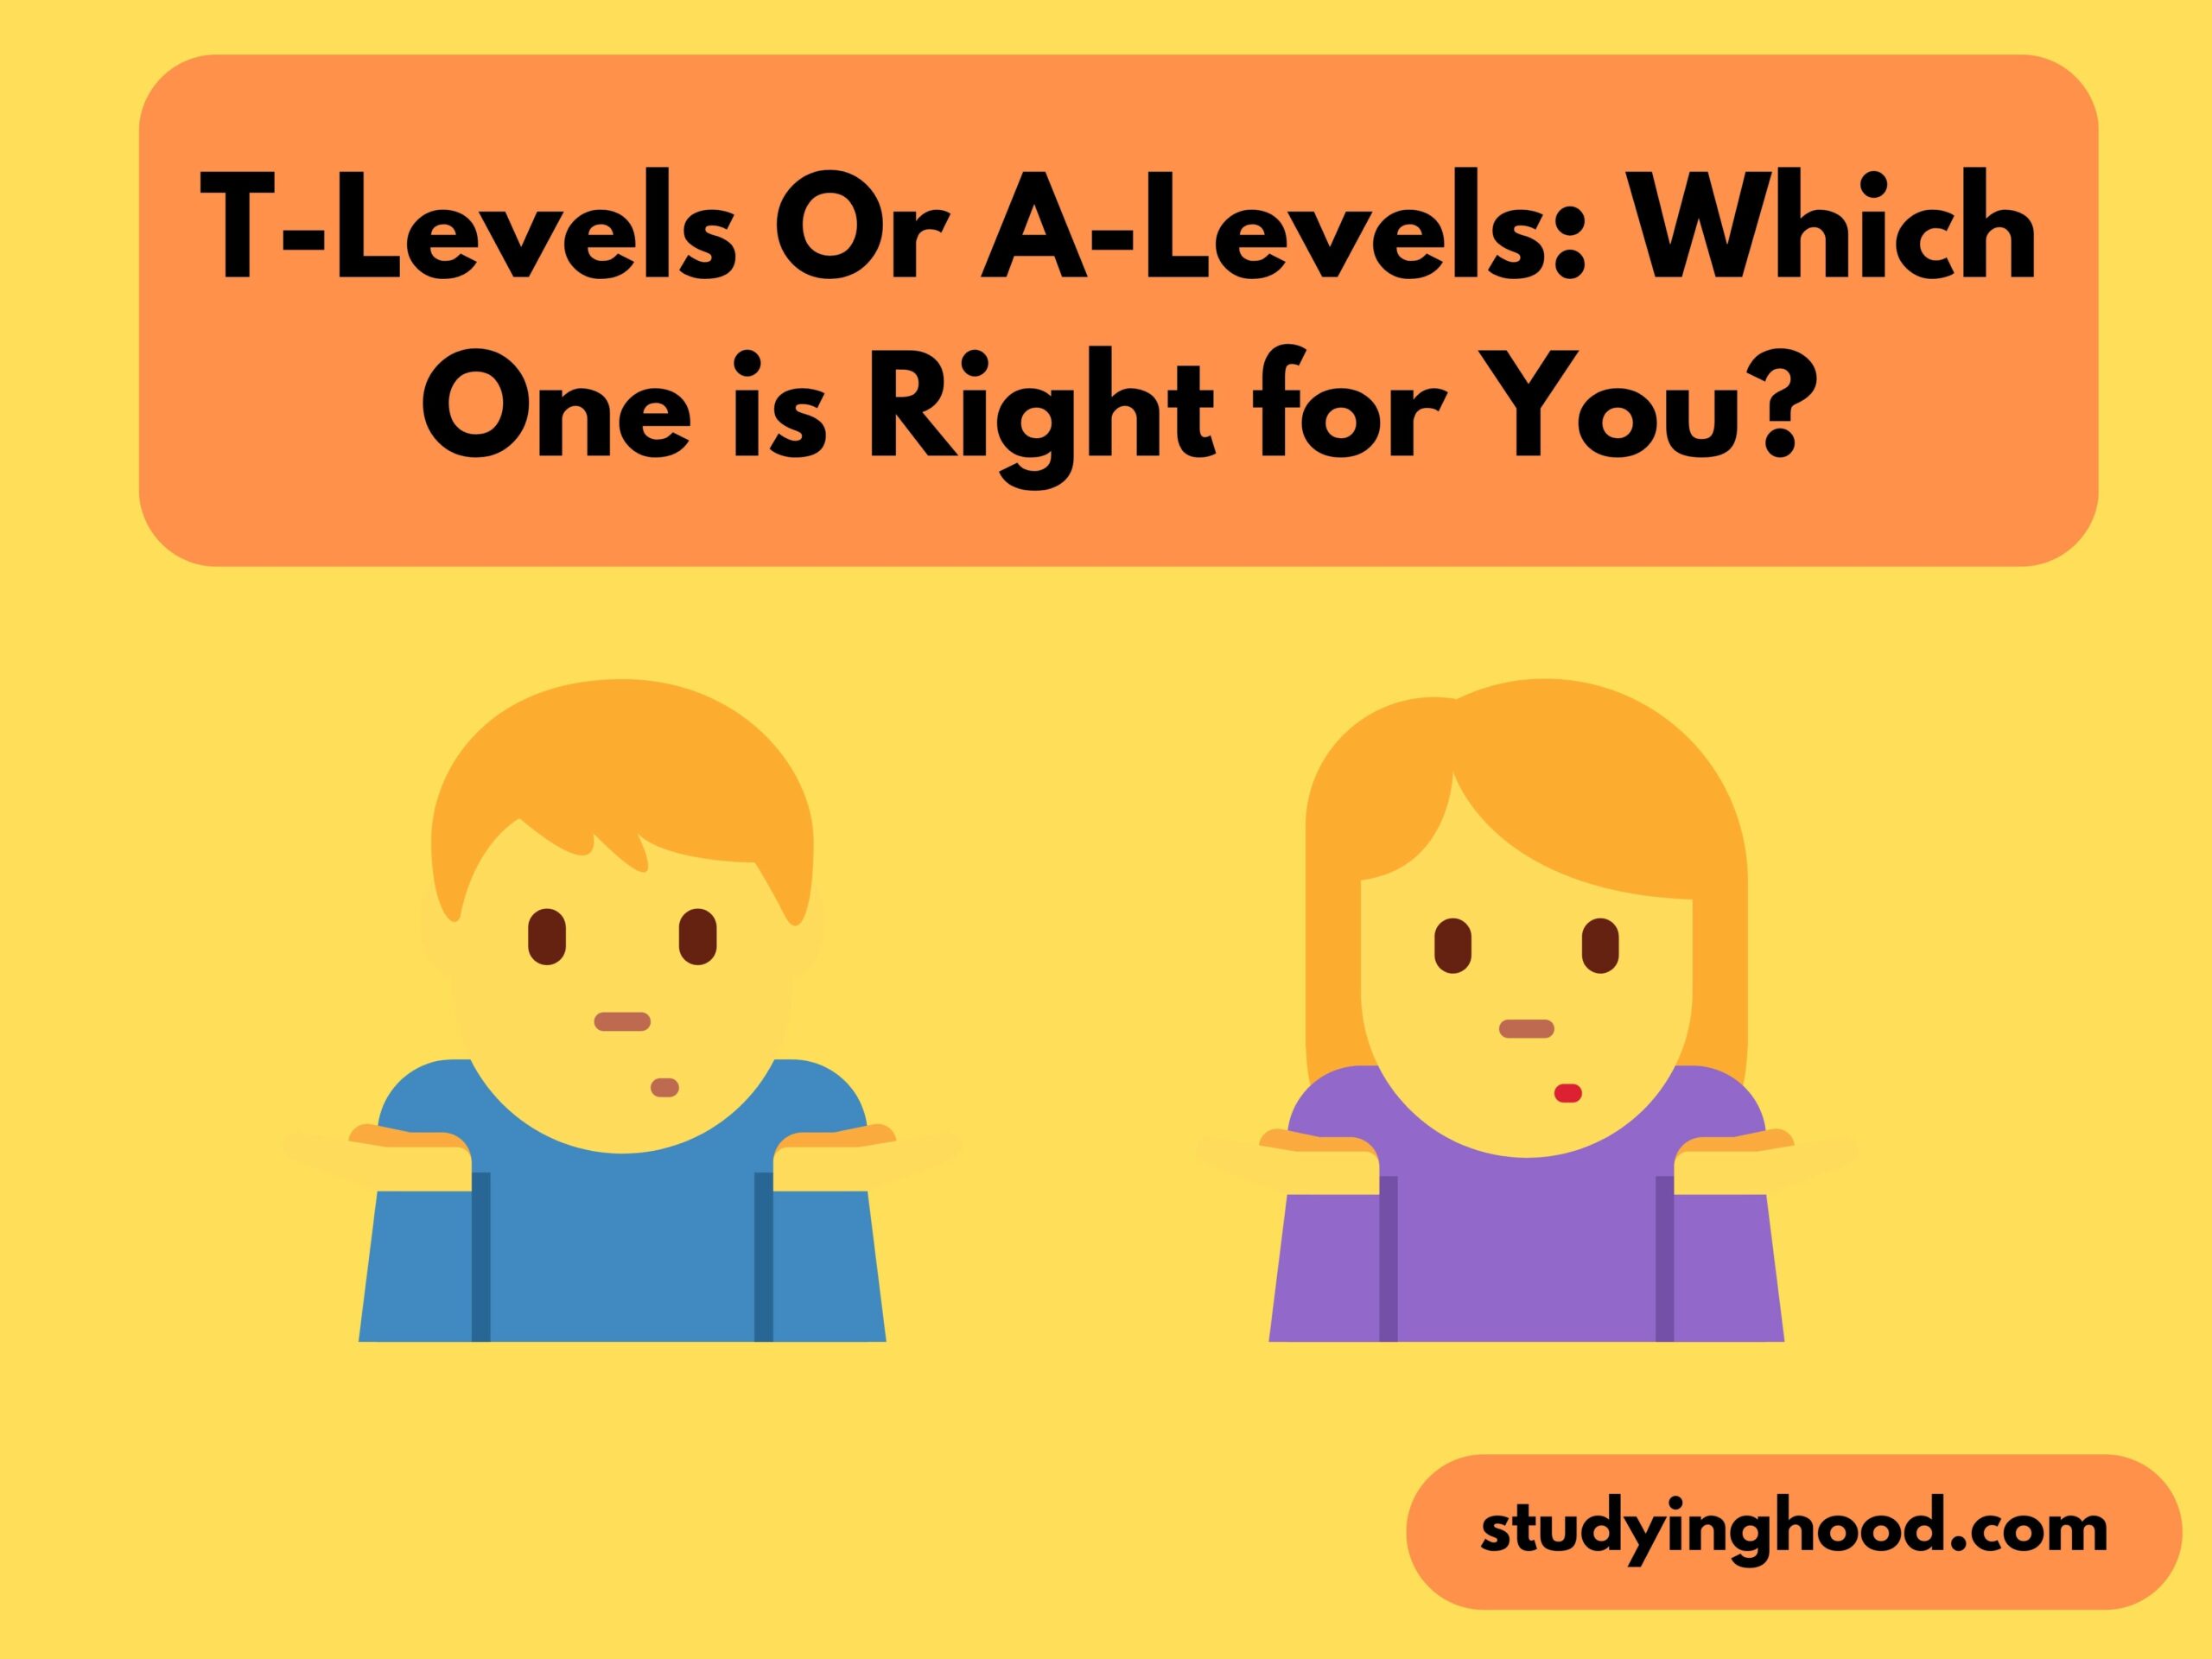 T-Levels Or A-Levels: Which One is Right for You?